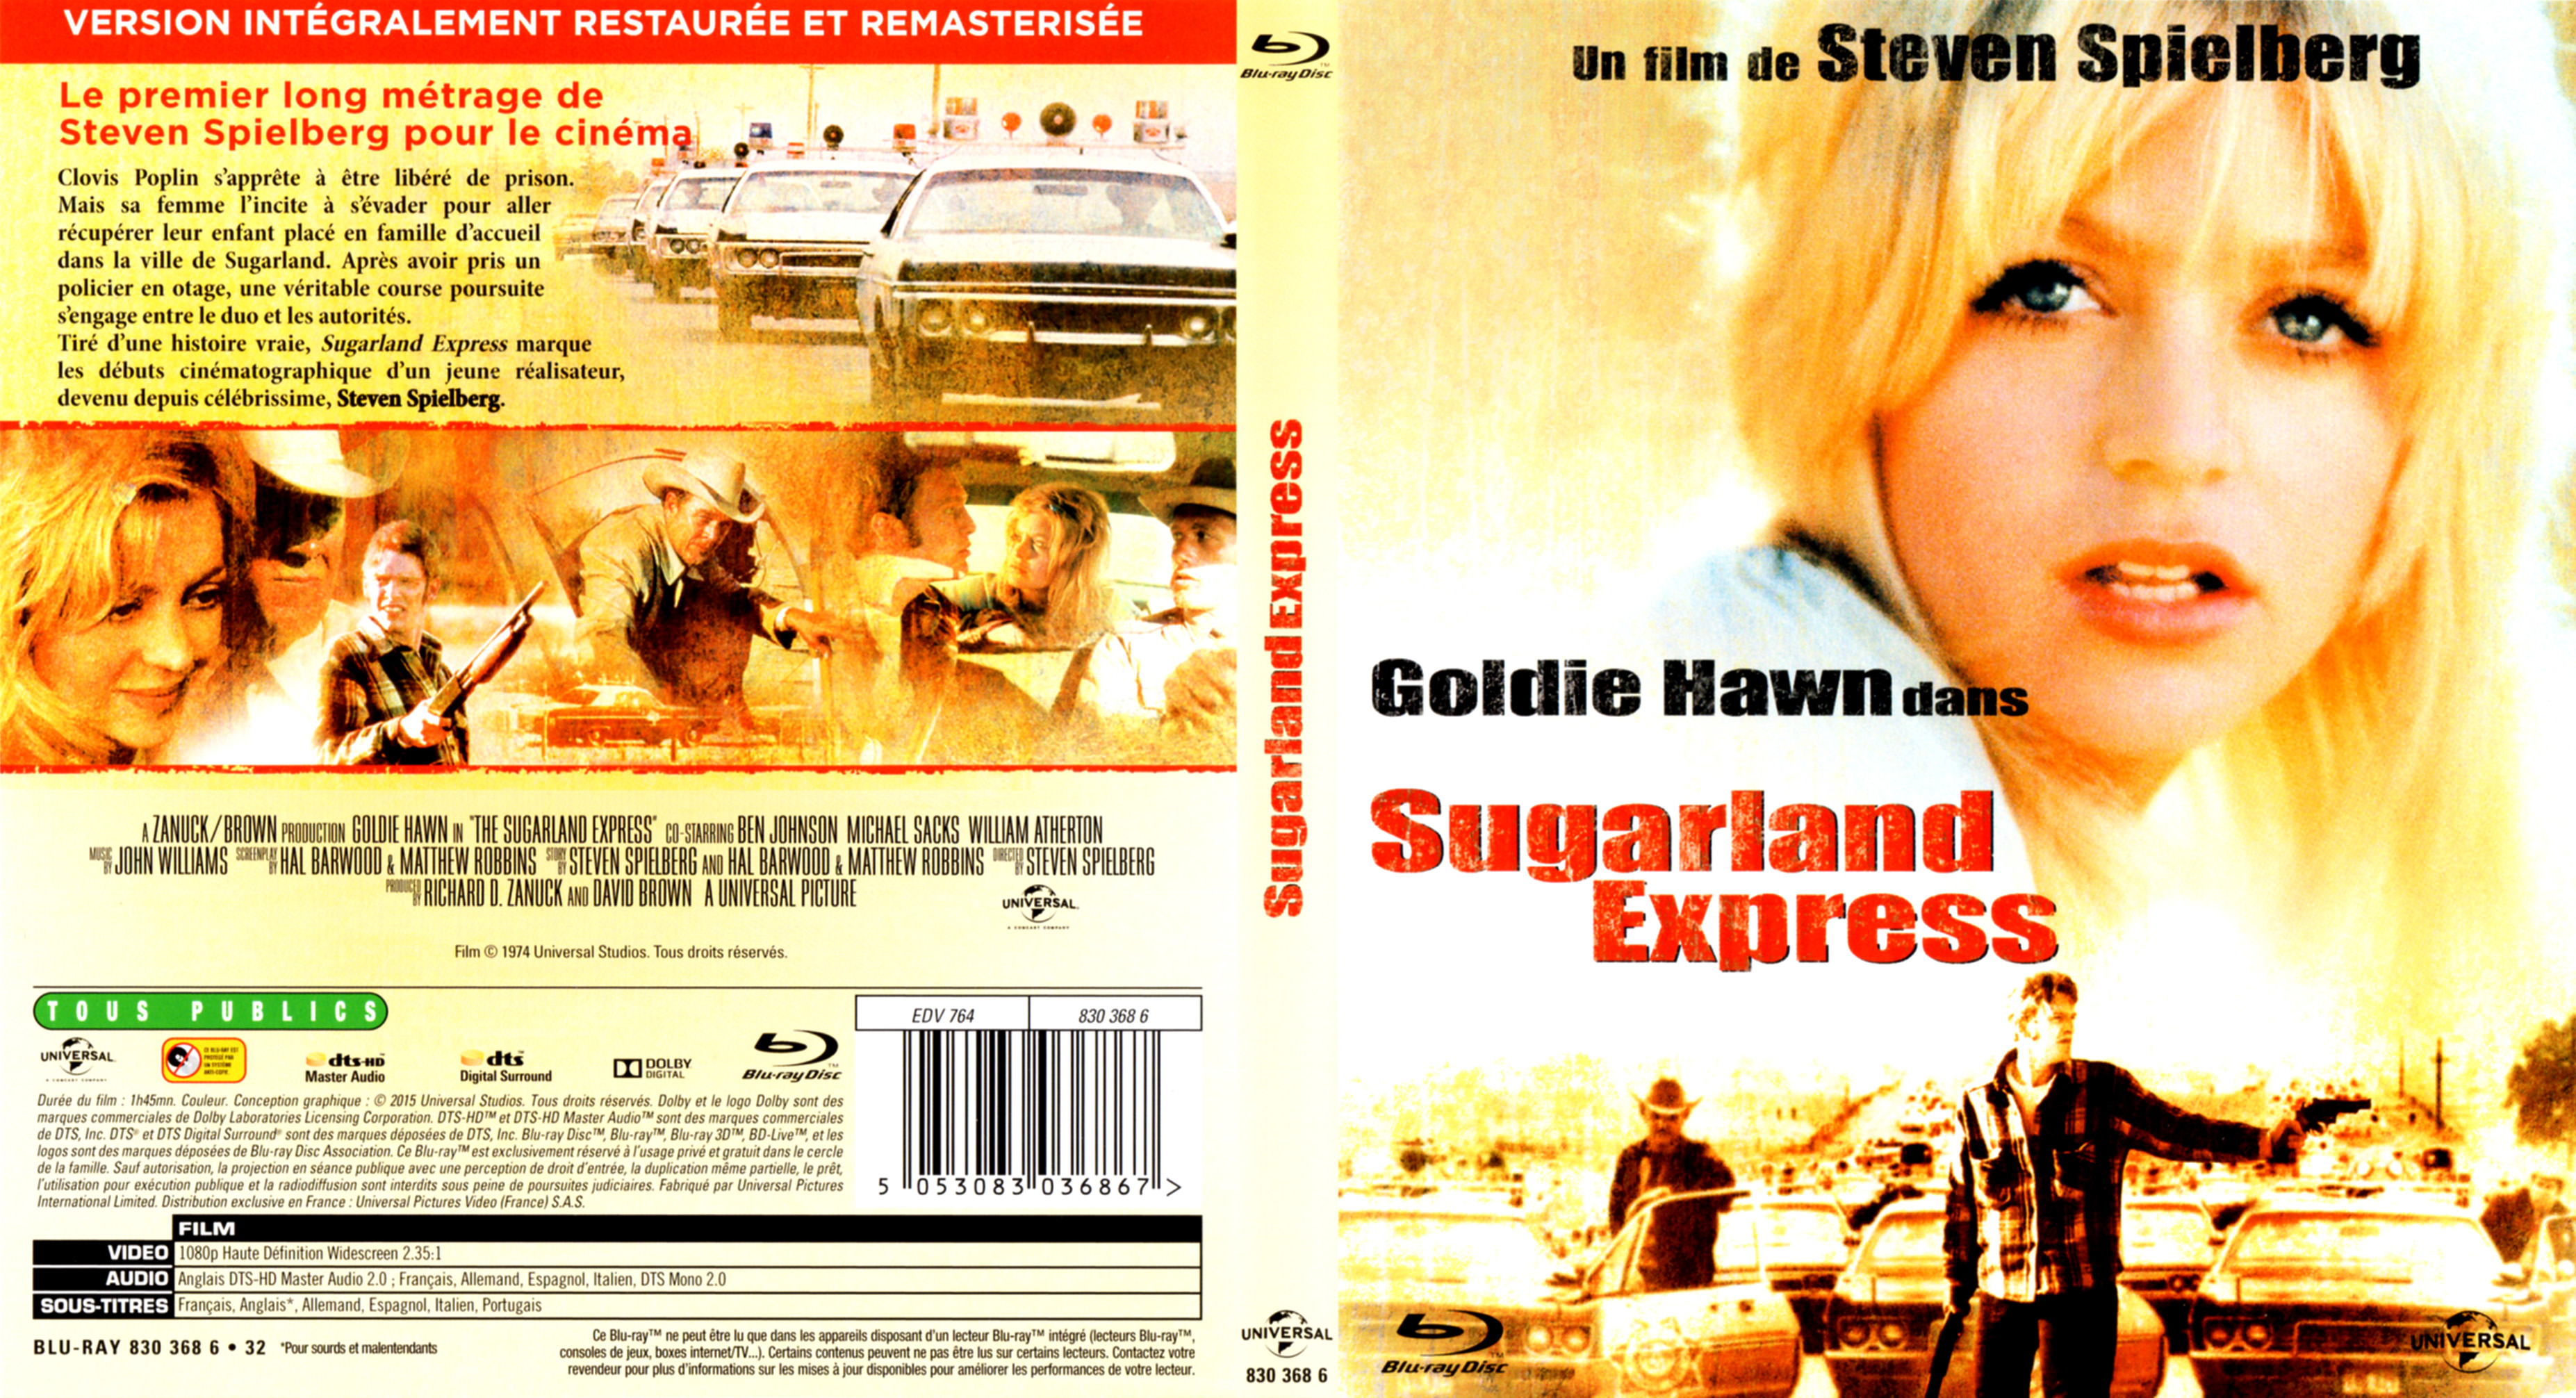 Jaquette DVD Sugarland express (BLU-RAY)